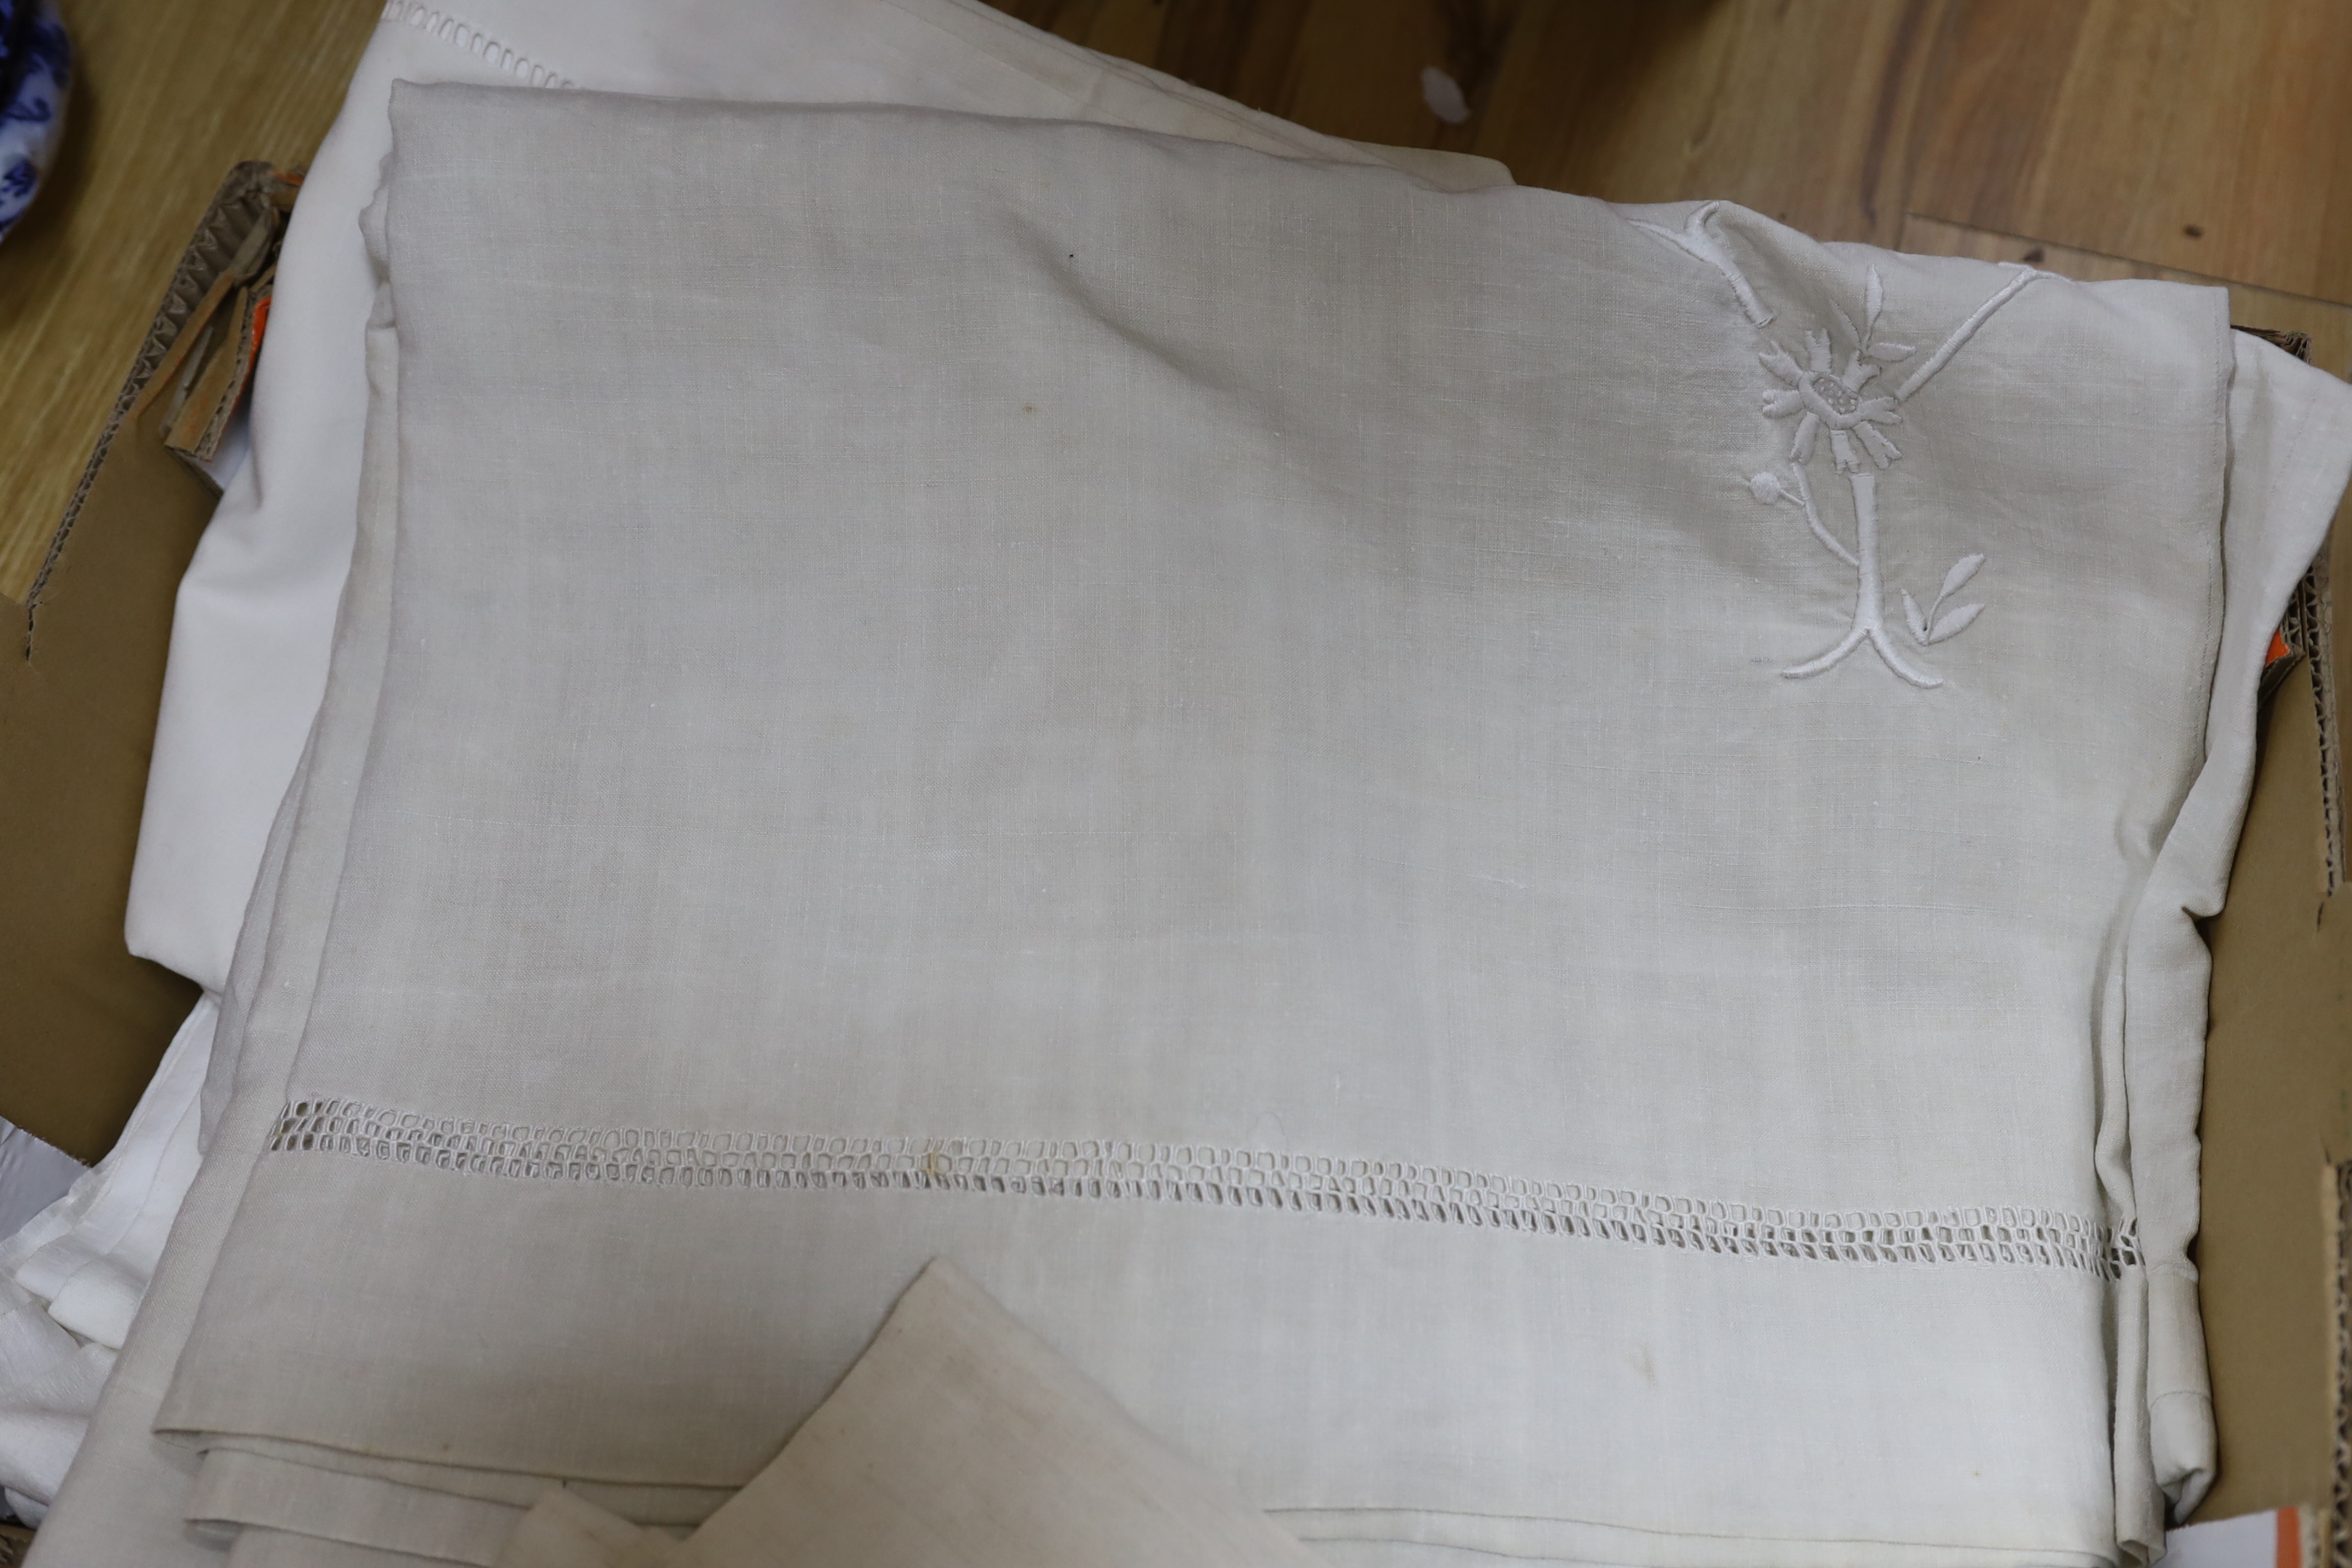 Six heavily embroidered French linen sheets